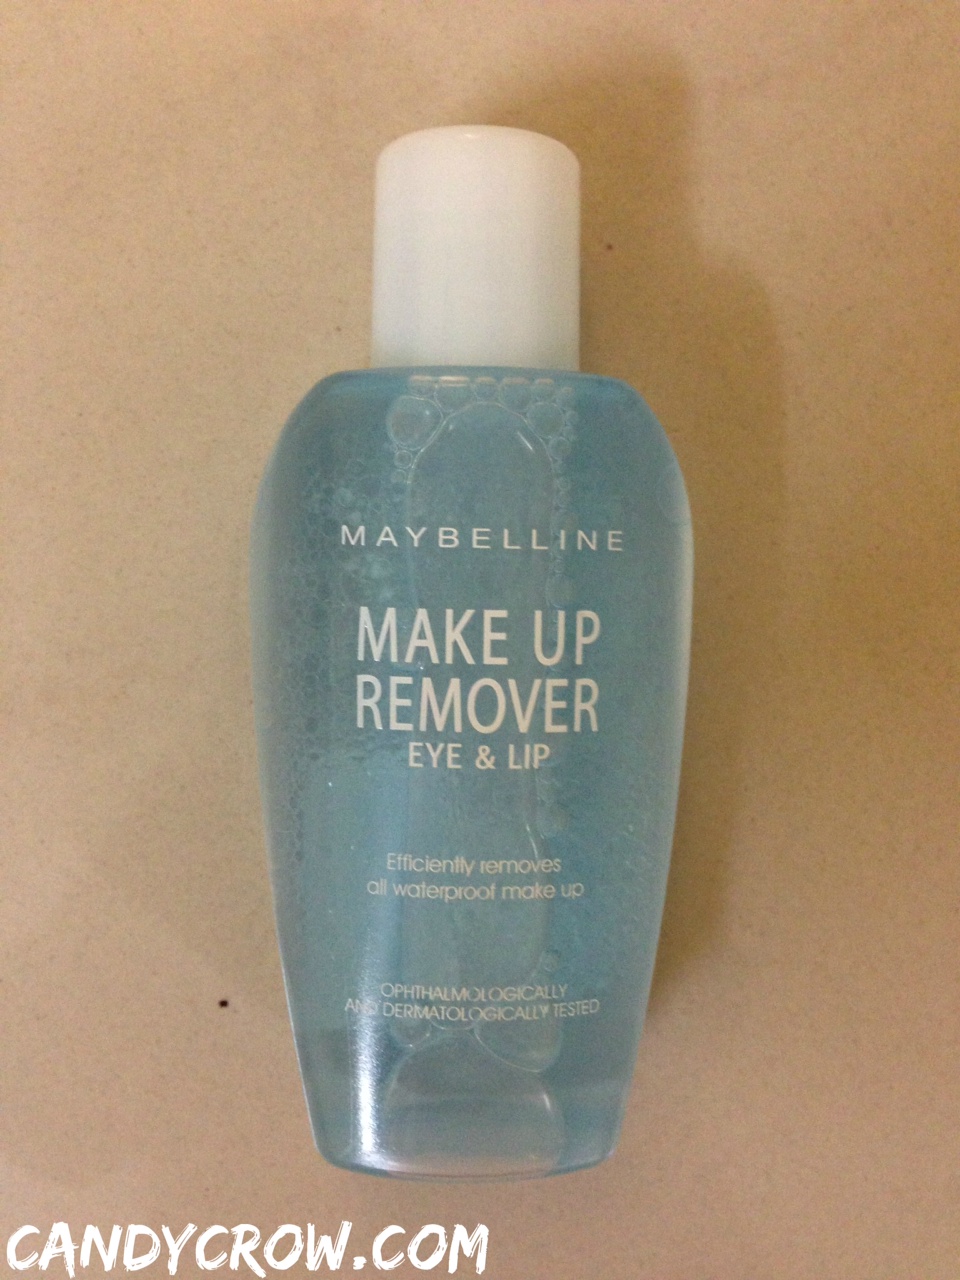 Maybelline makeup remover Review eye makeup remover review